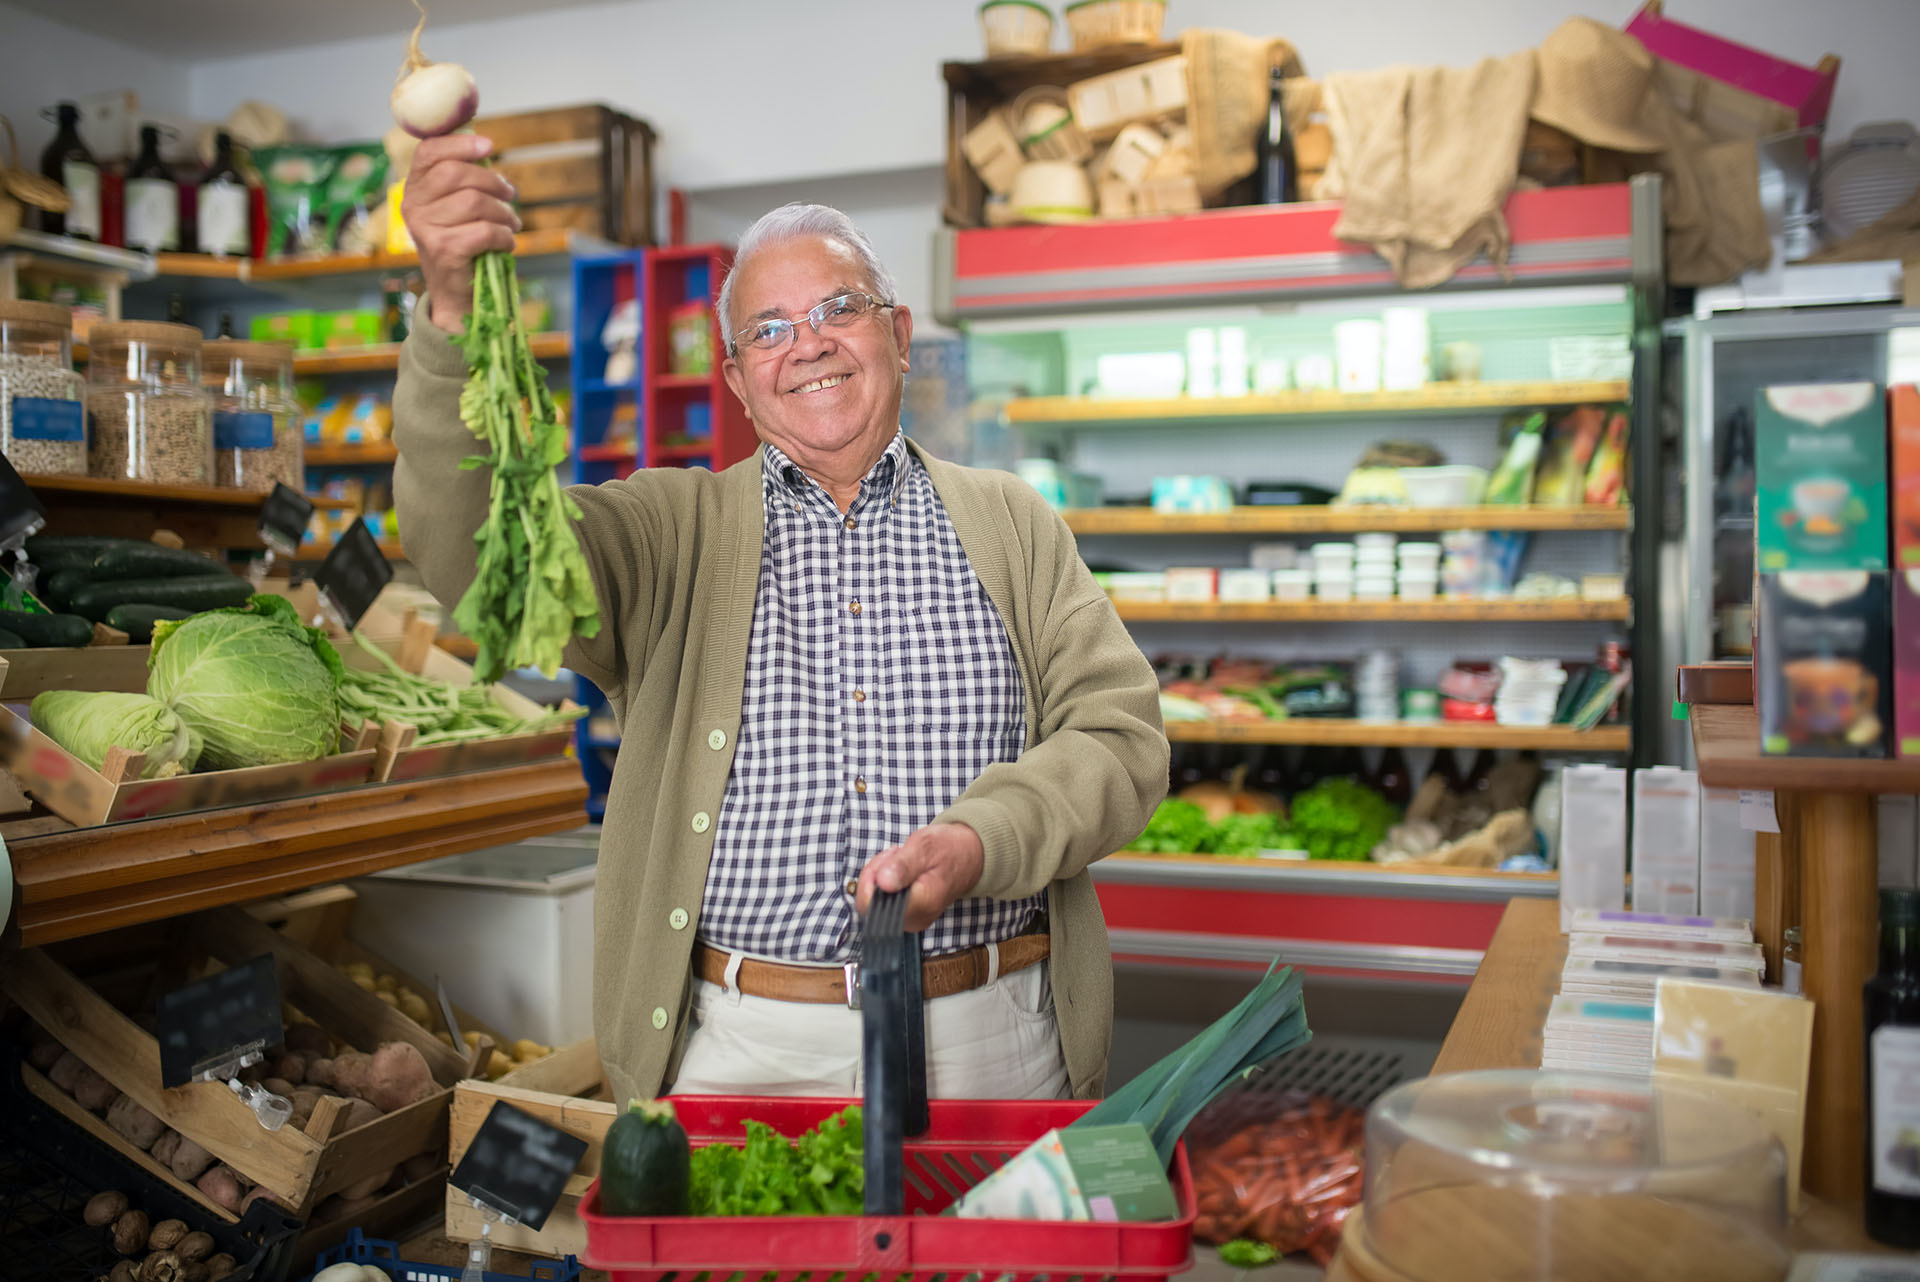 A happy man finding fresh produce in a store.